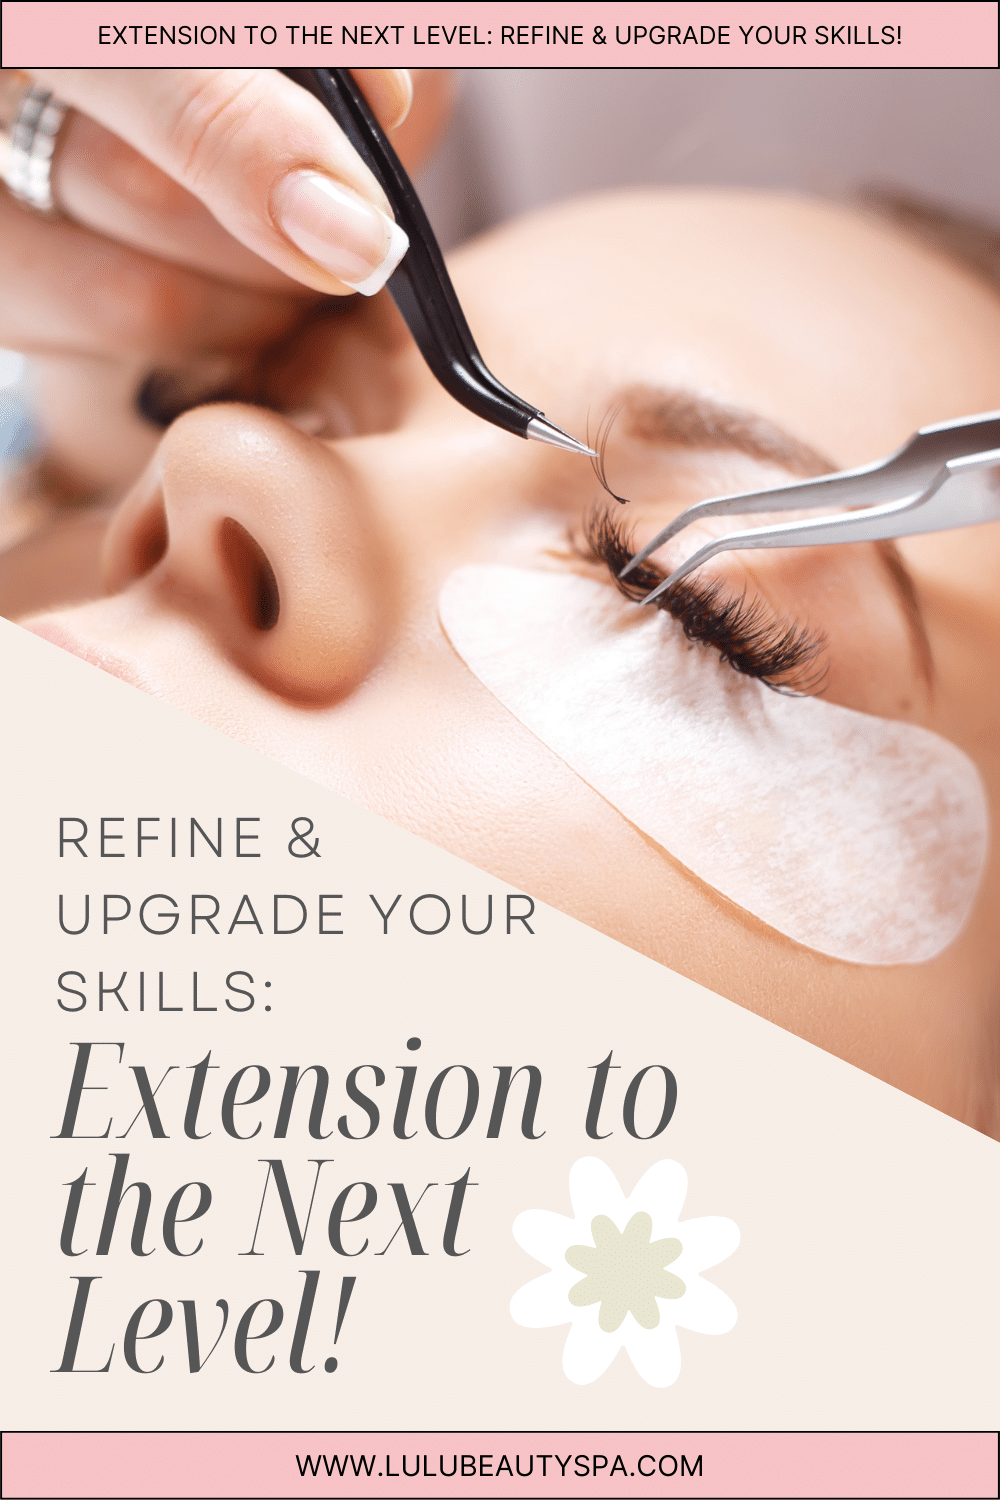 Extension to the Next Level: Refine & Upgrade Your Skills